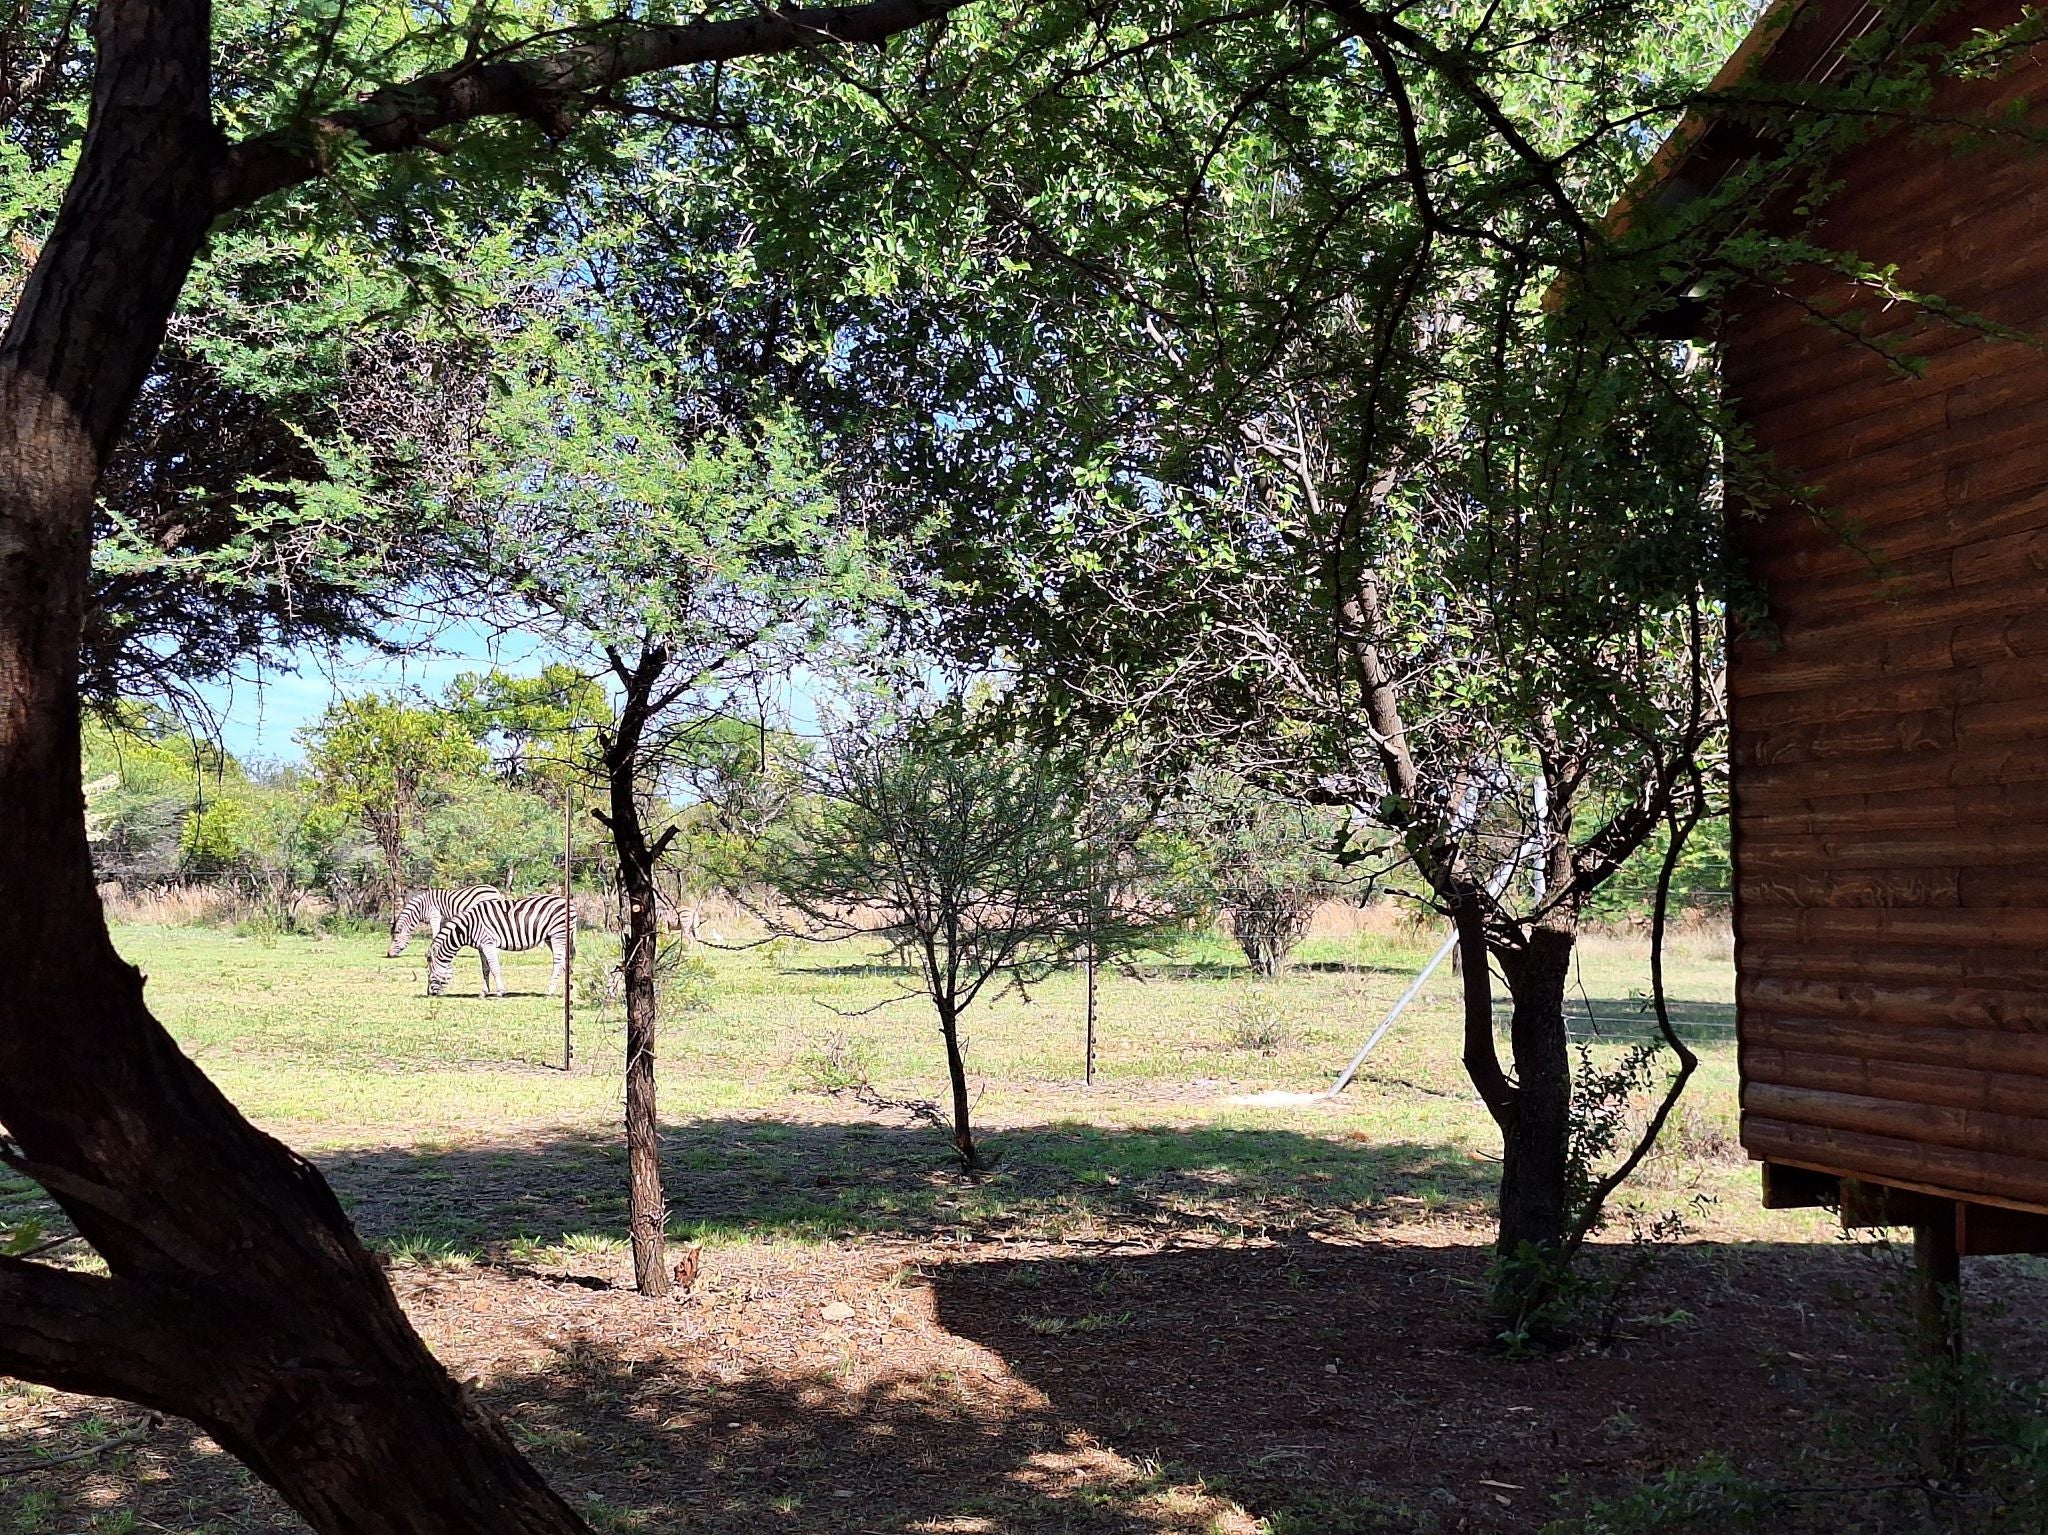 Thorn Tree Bush Camp Campsites Dinokeng Game Reserve Gauteng South Africa Plant, Nature, Tree, Wood